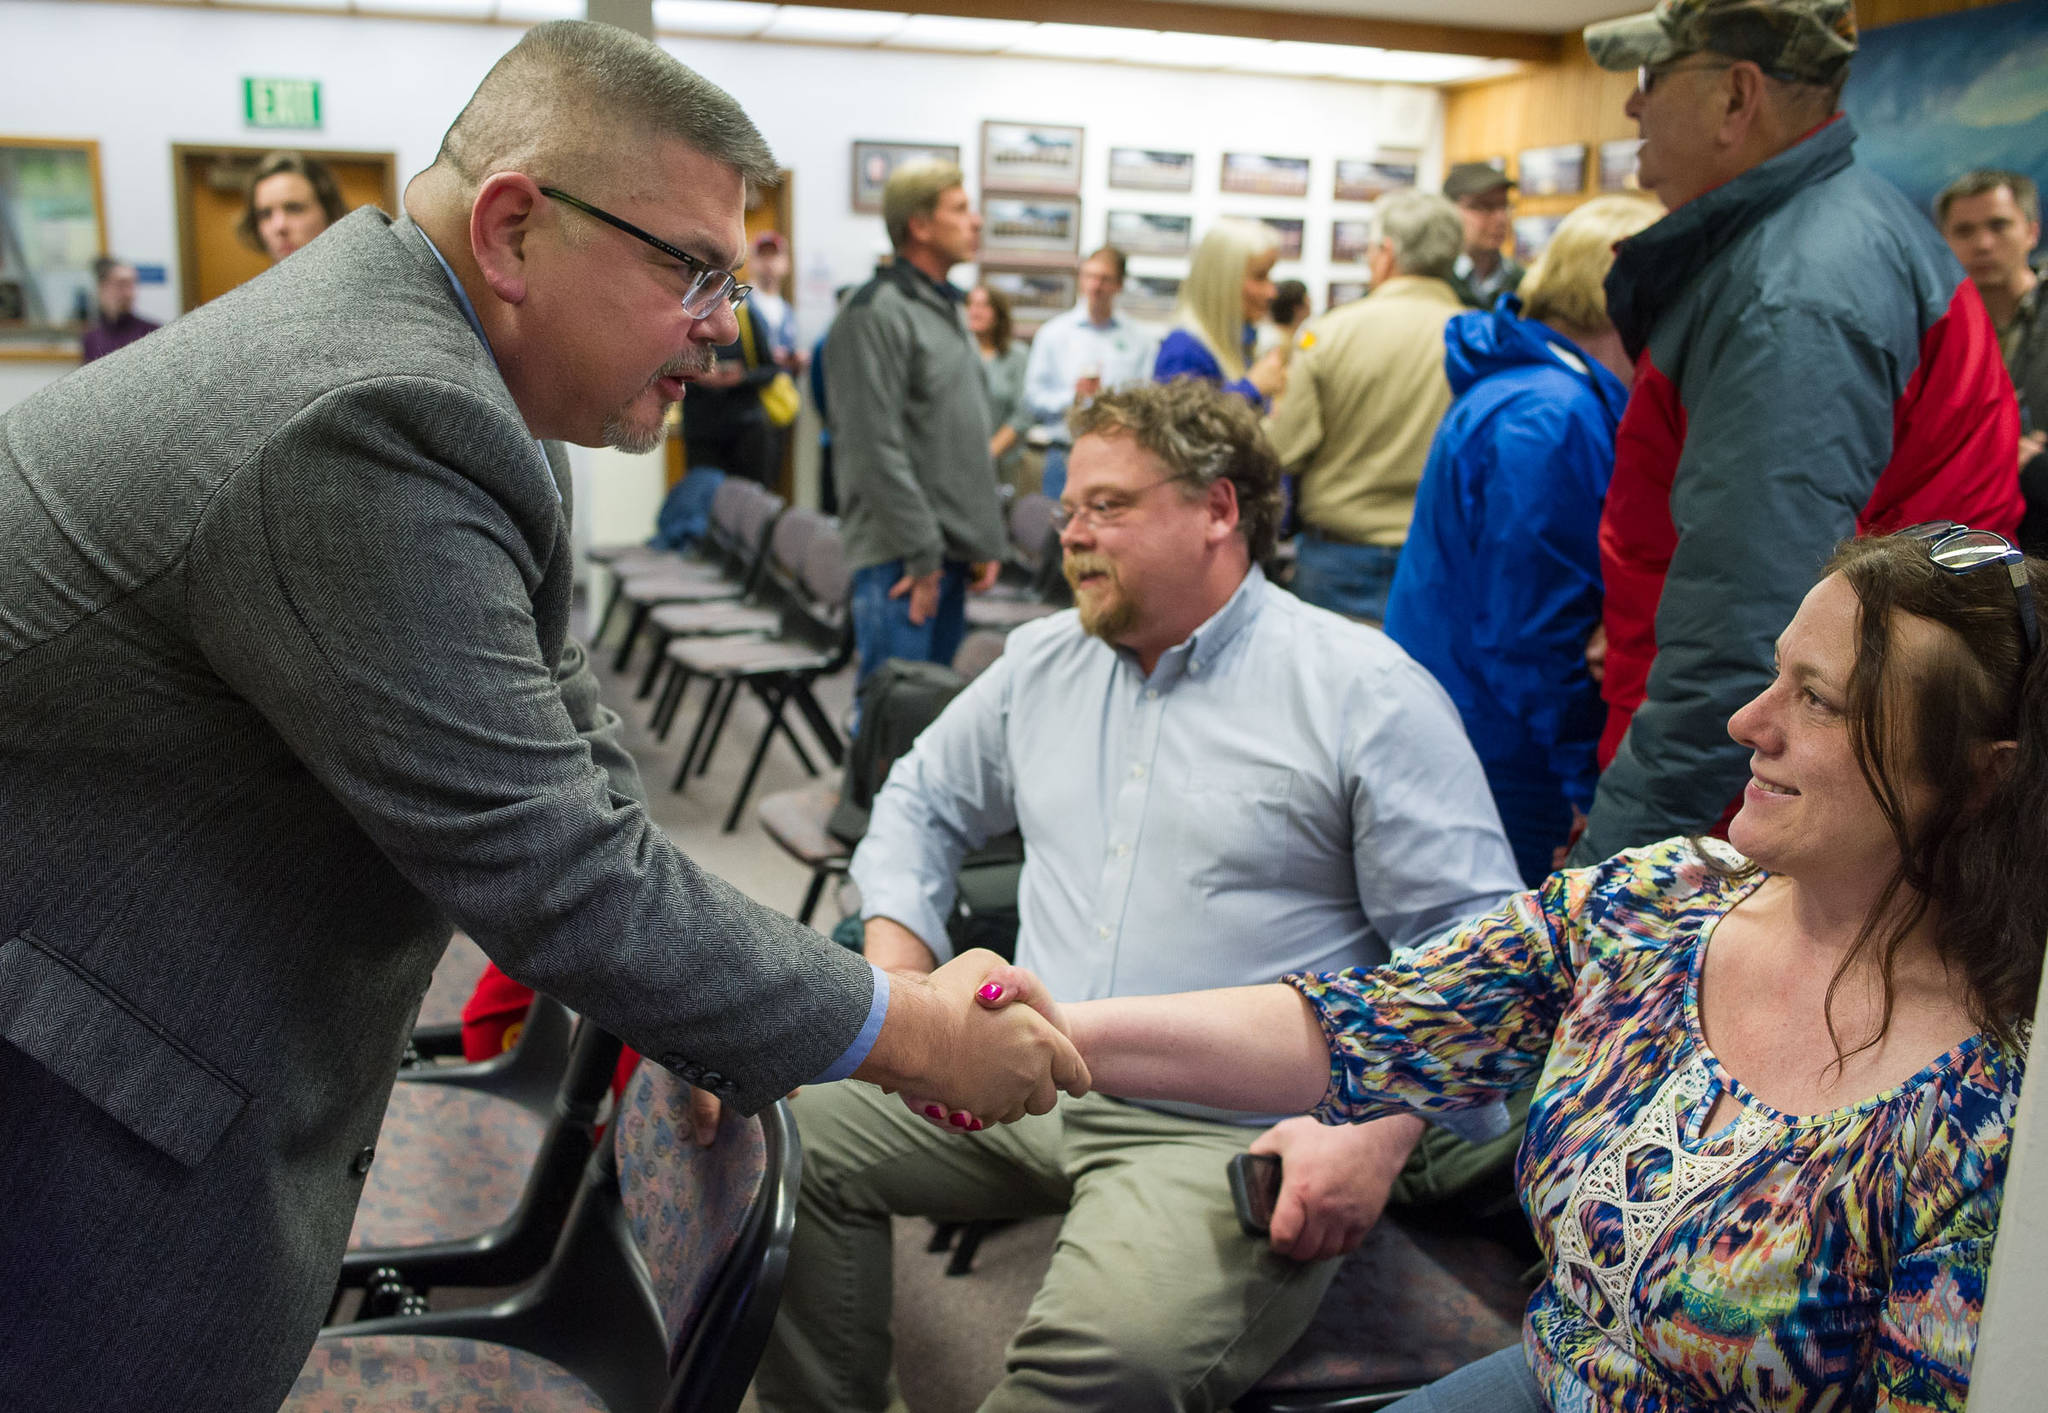 Rob Edwardson, left, greets Debbie White after election results showed him winning by a wide margin at the Assembly chambers on Tuesday, Oct. 3, 2017. (Michael Penn | Juneau Empire)